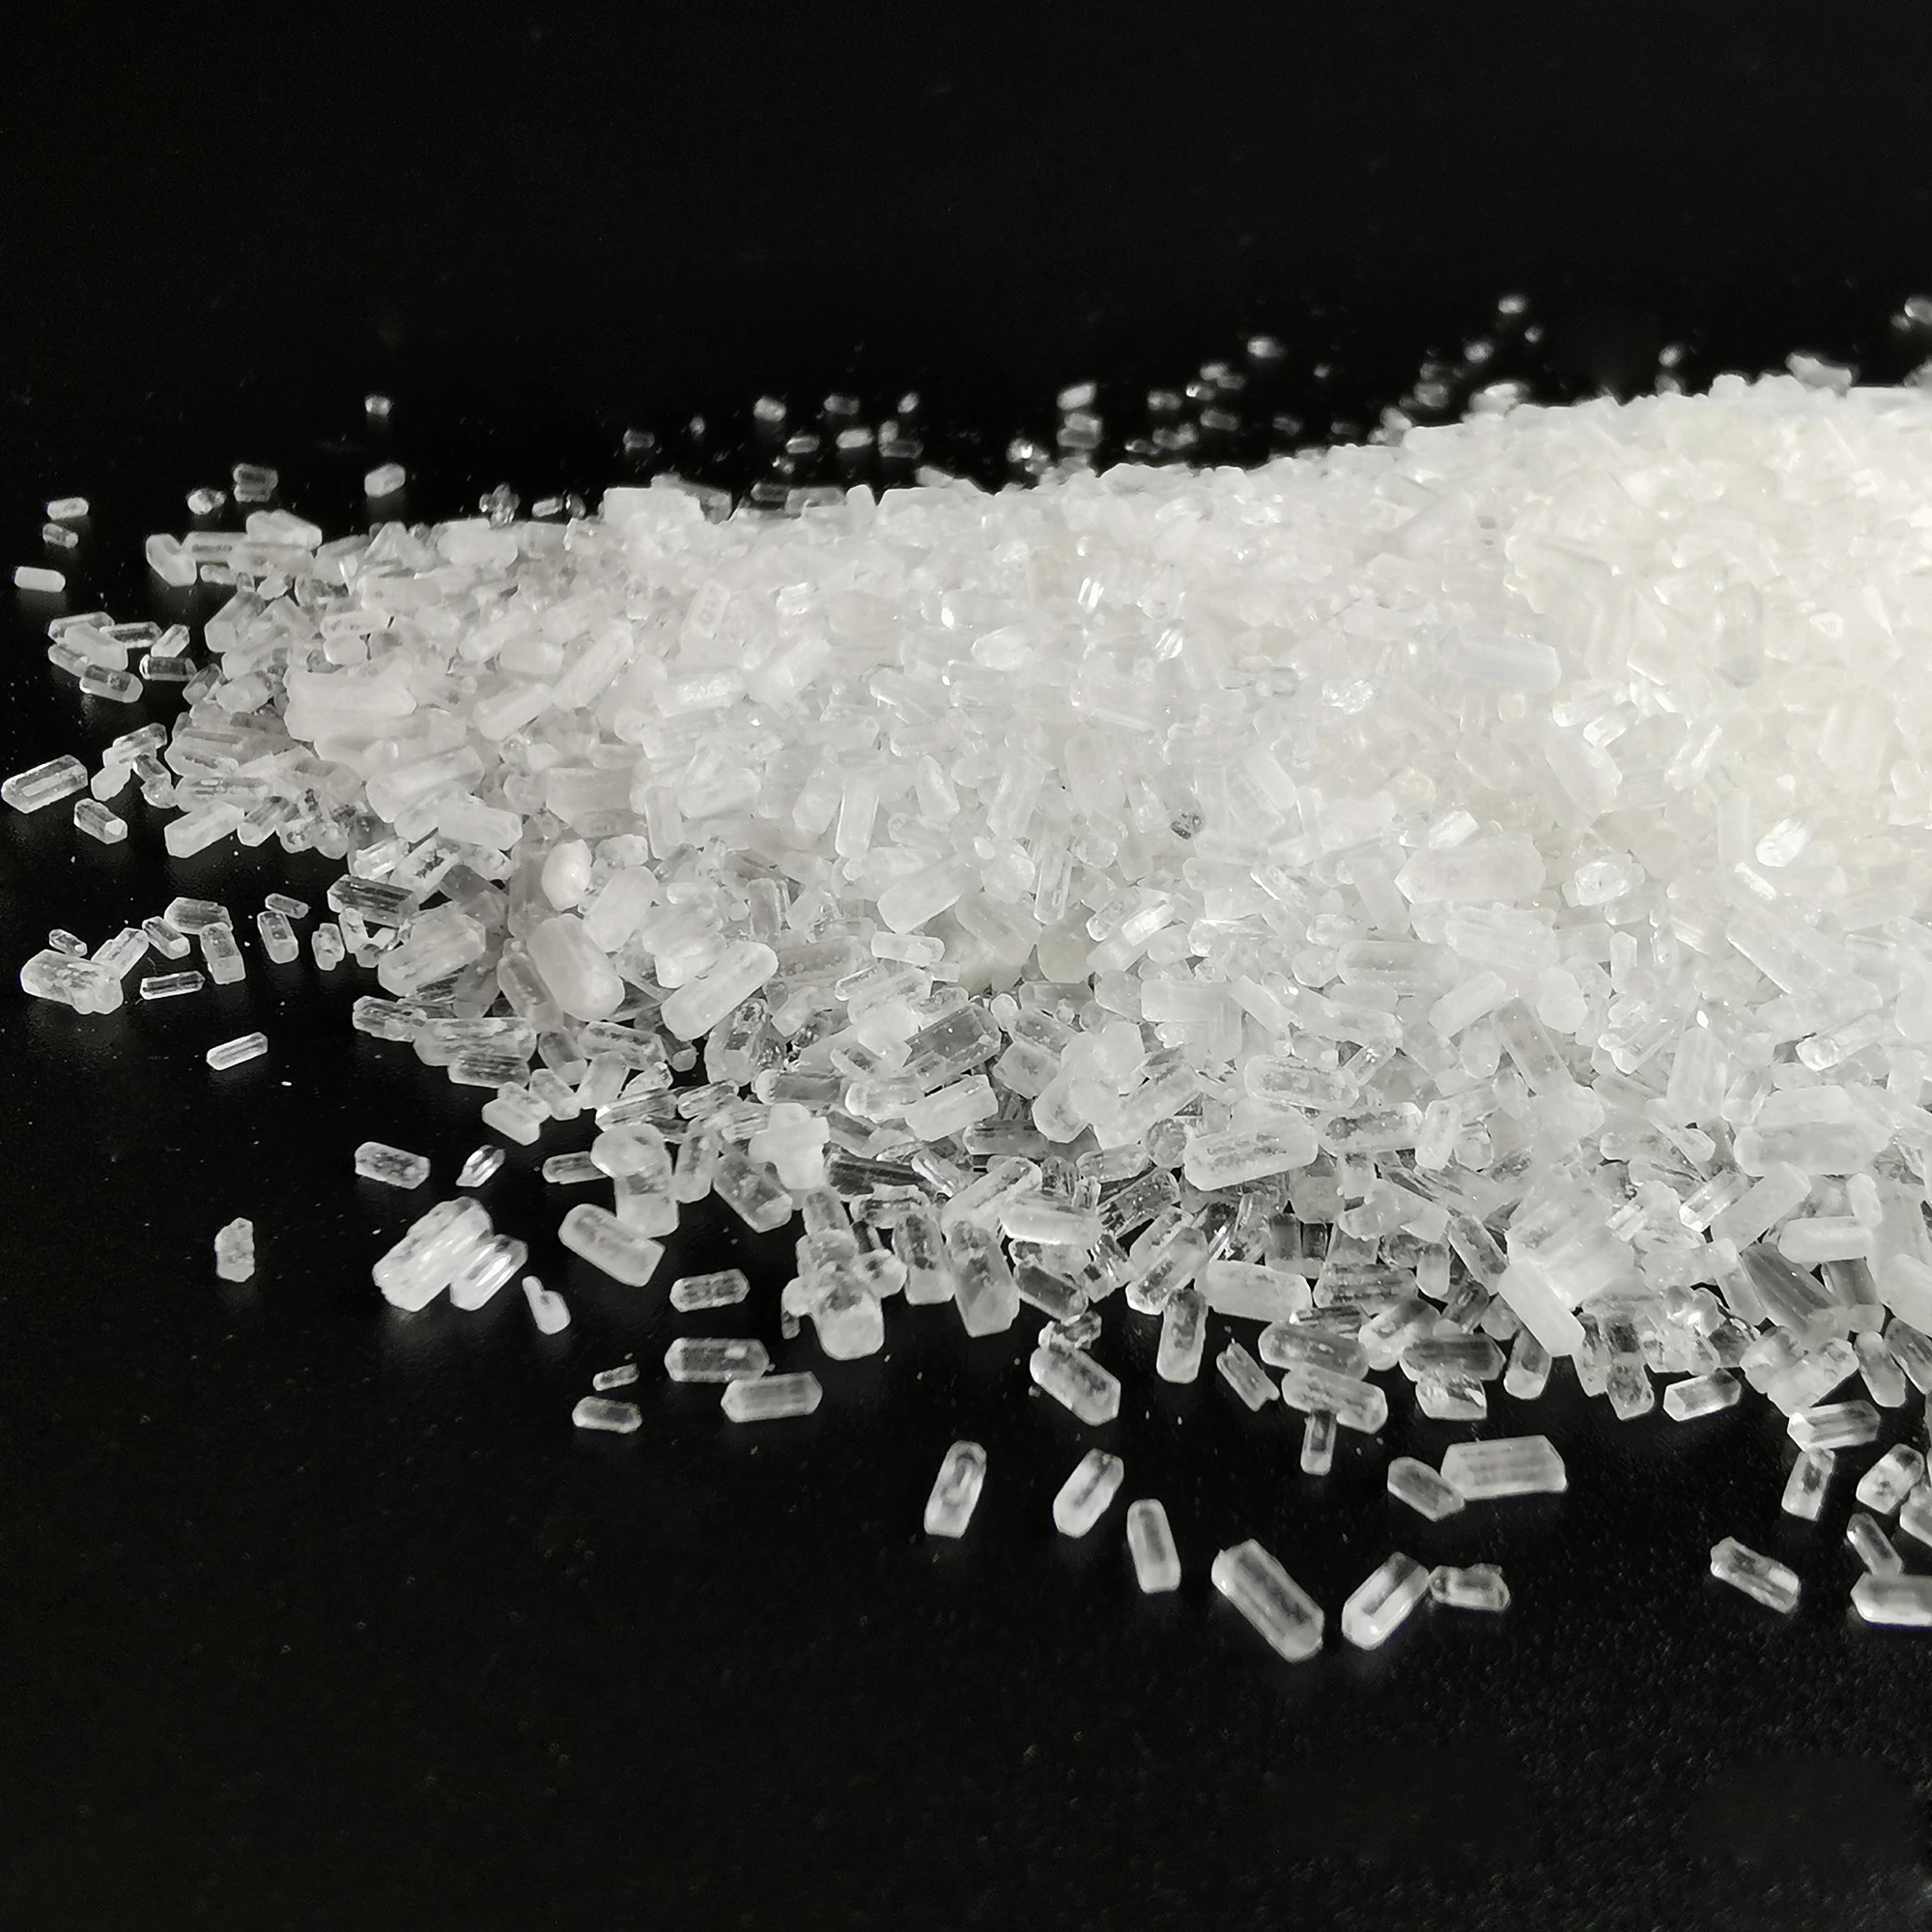 99.55 fertilizer grade magnesium sulphate MgSO4.7H2O used to raise the sugar content